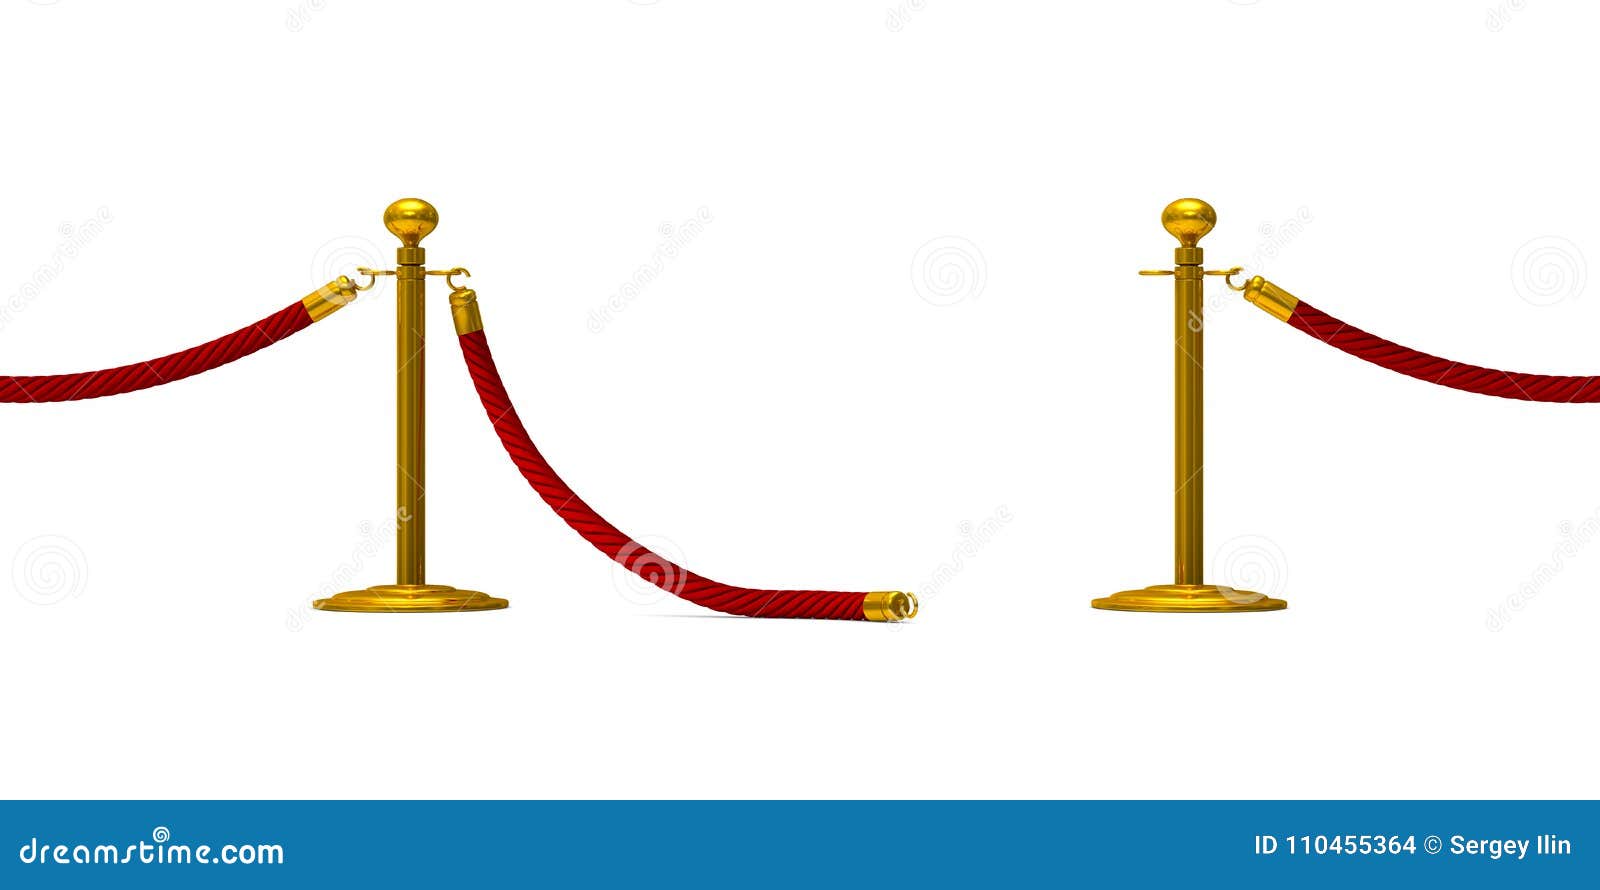 Barrier rope on white background. Isolated 3D illustration.